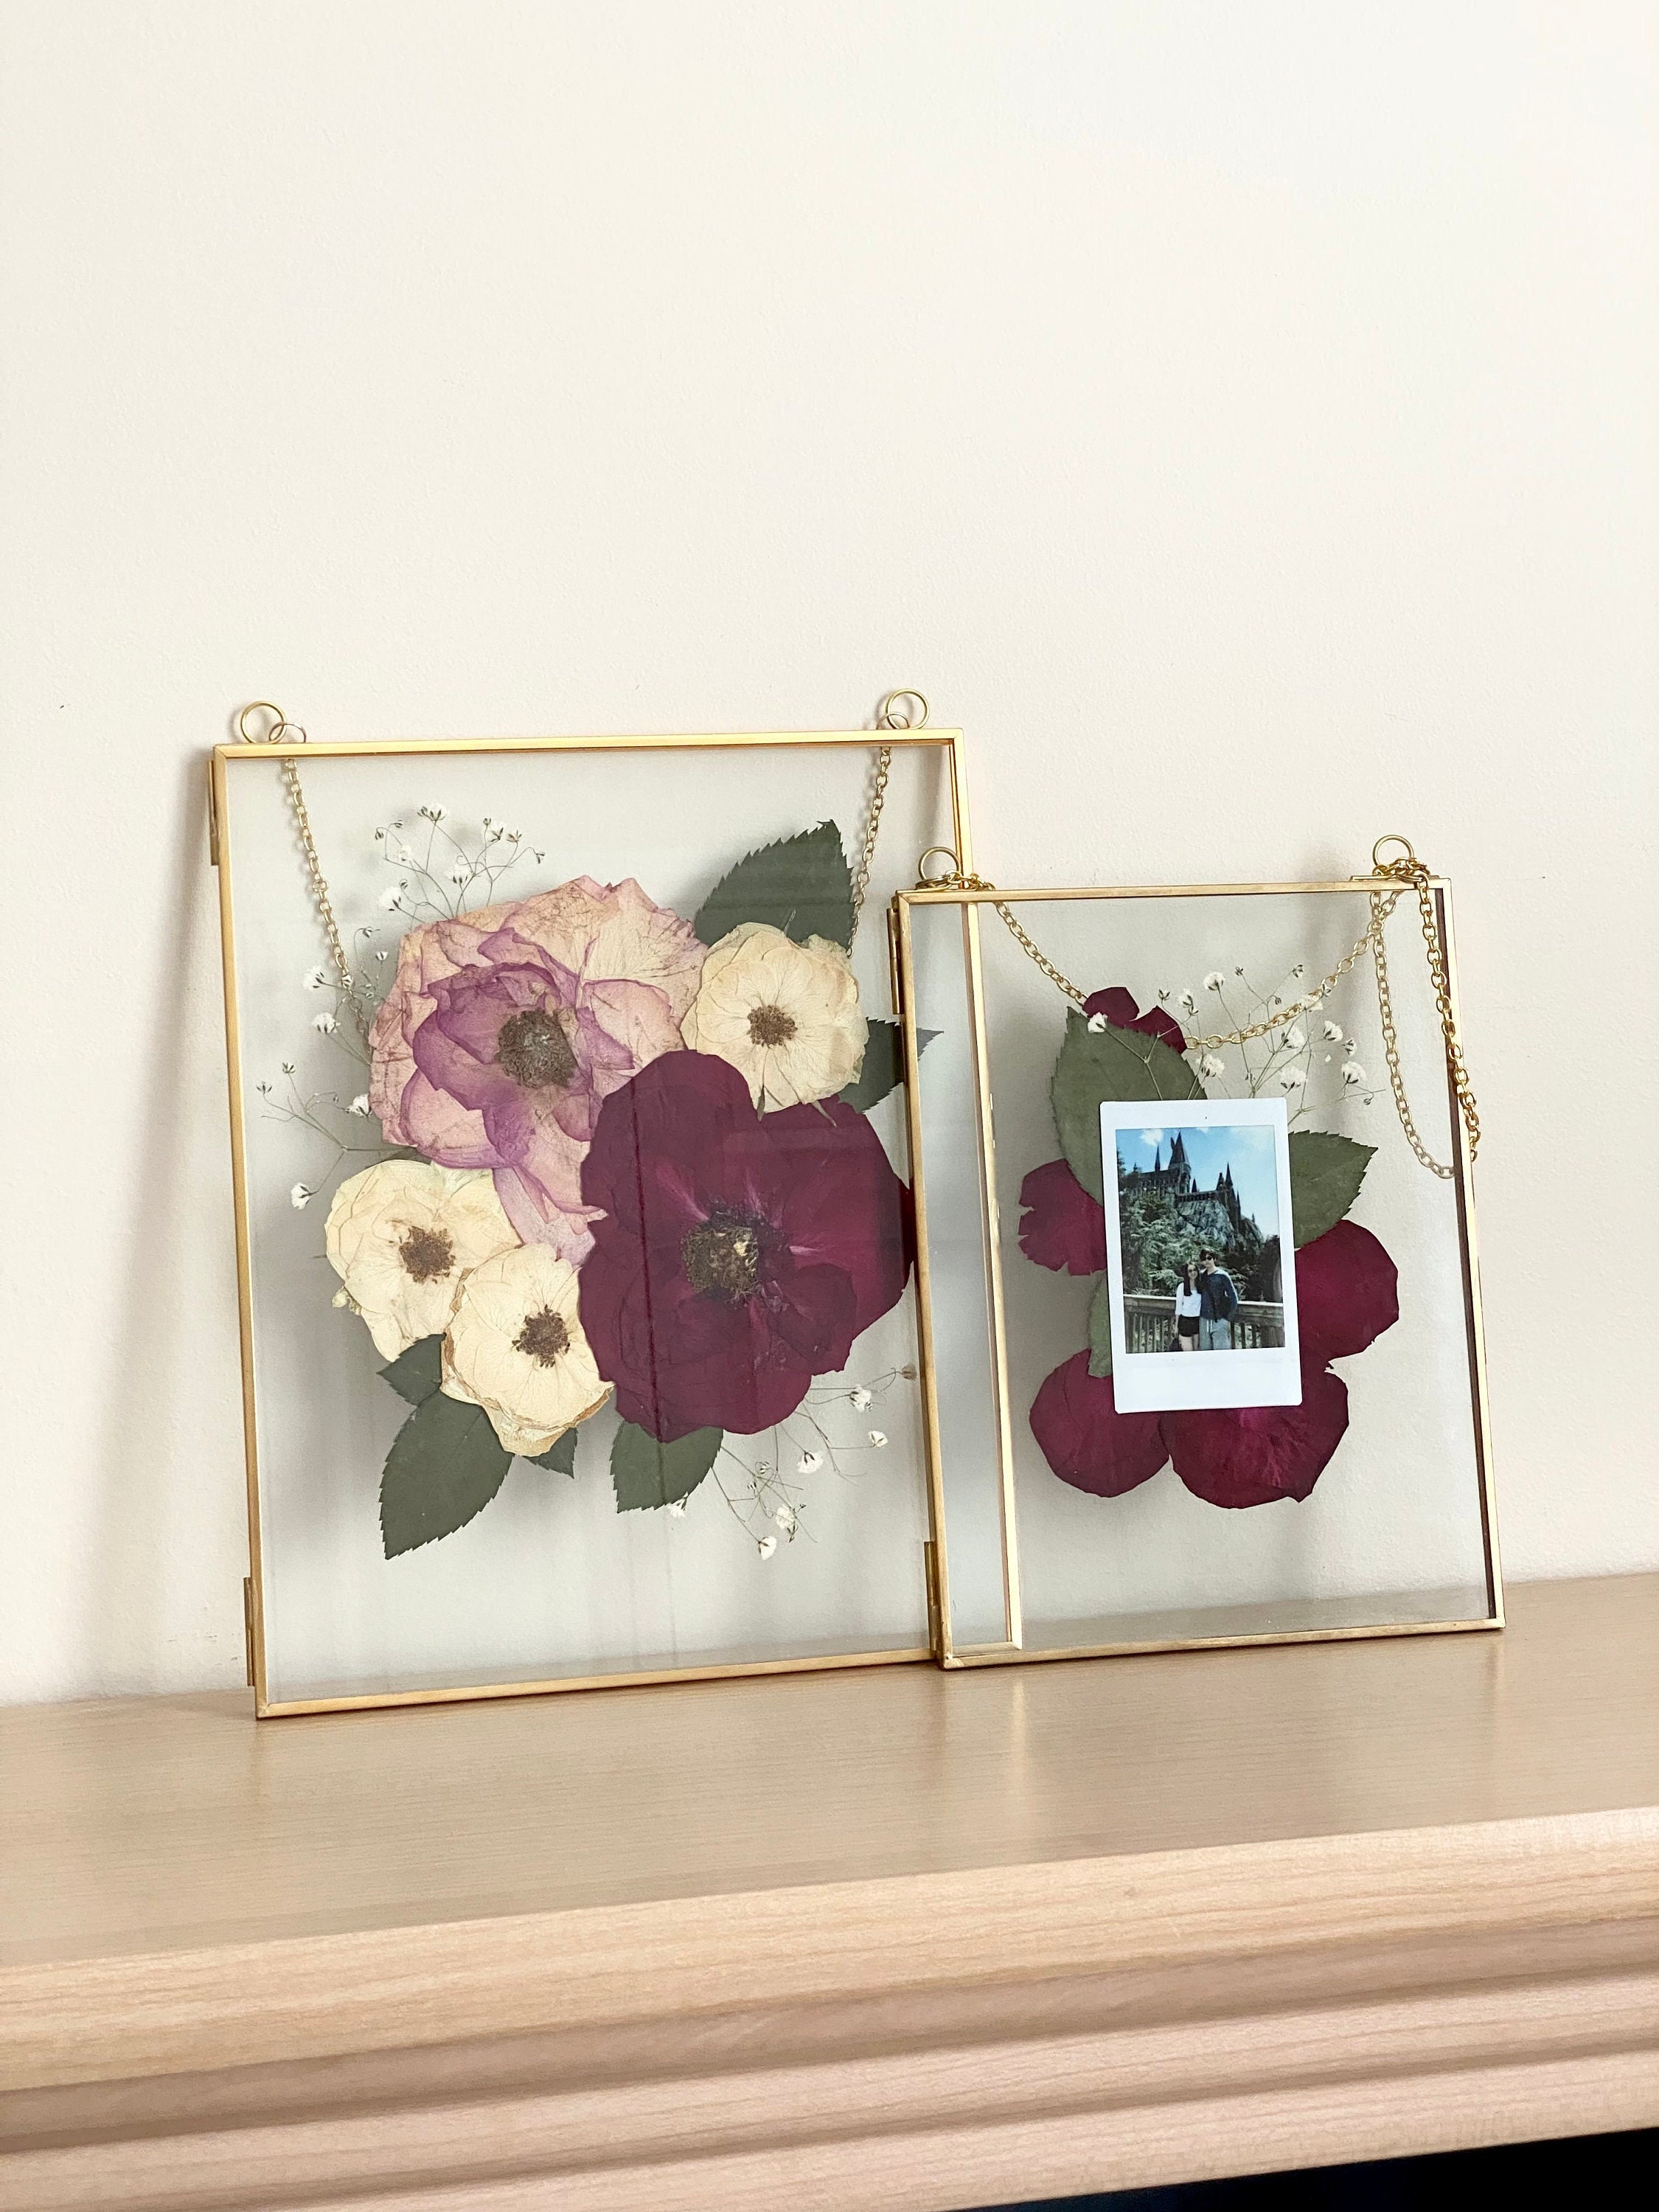 Glass Frame for Pressed Flowers, Leaf and Artwork - Hanging Gold 6x6 Square  Metal Picture Frames, Clear Double Glass Floating Frame, Wall Decor Photo